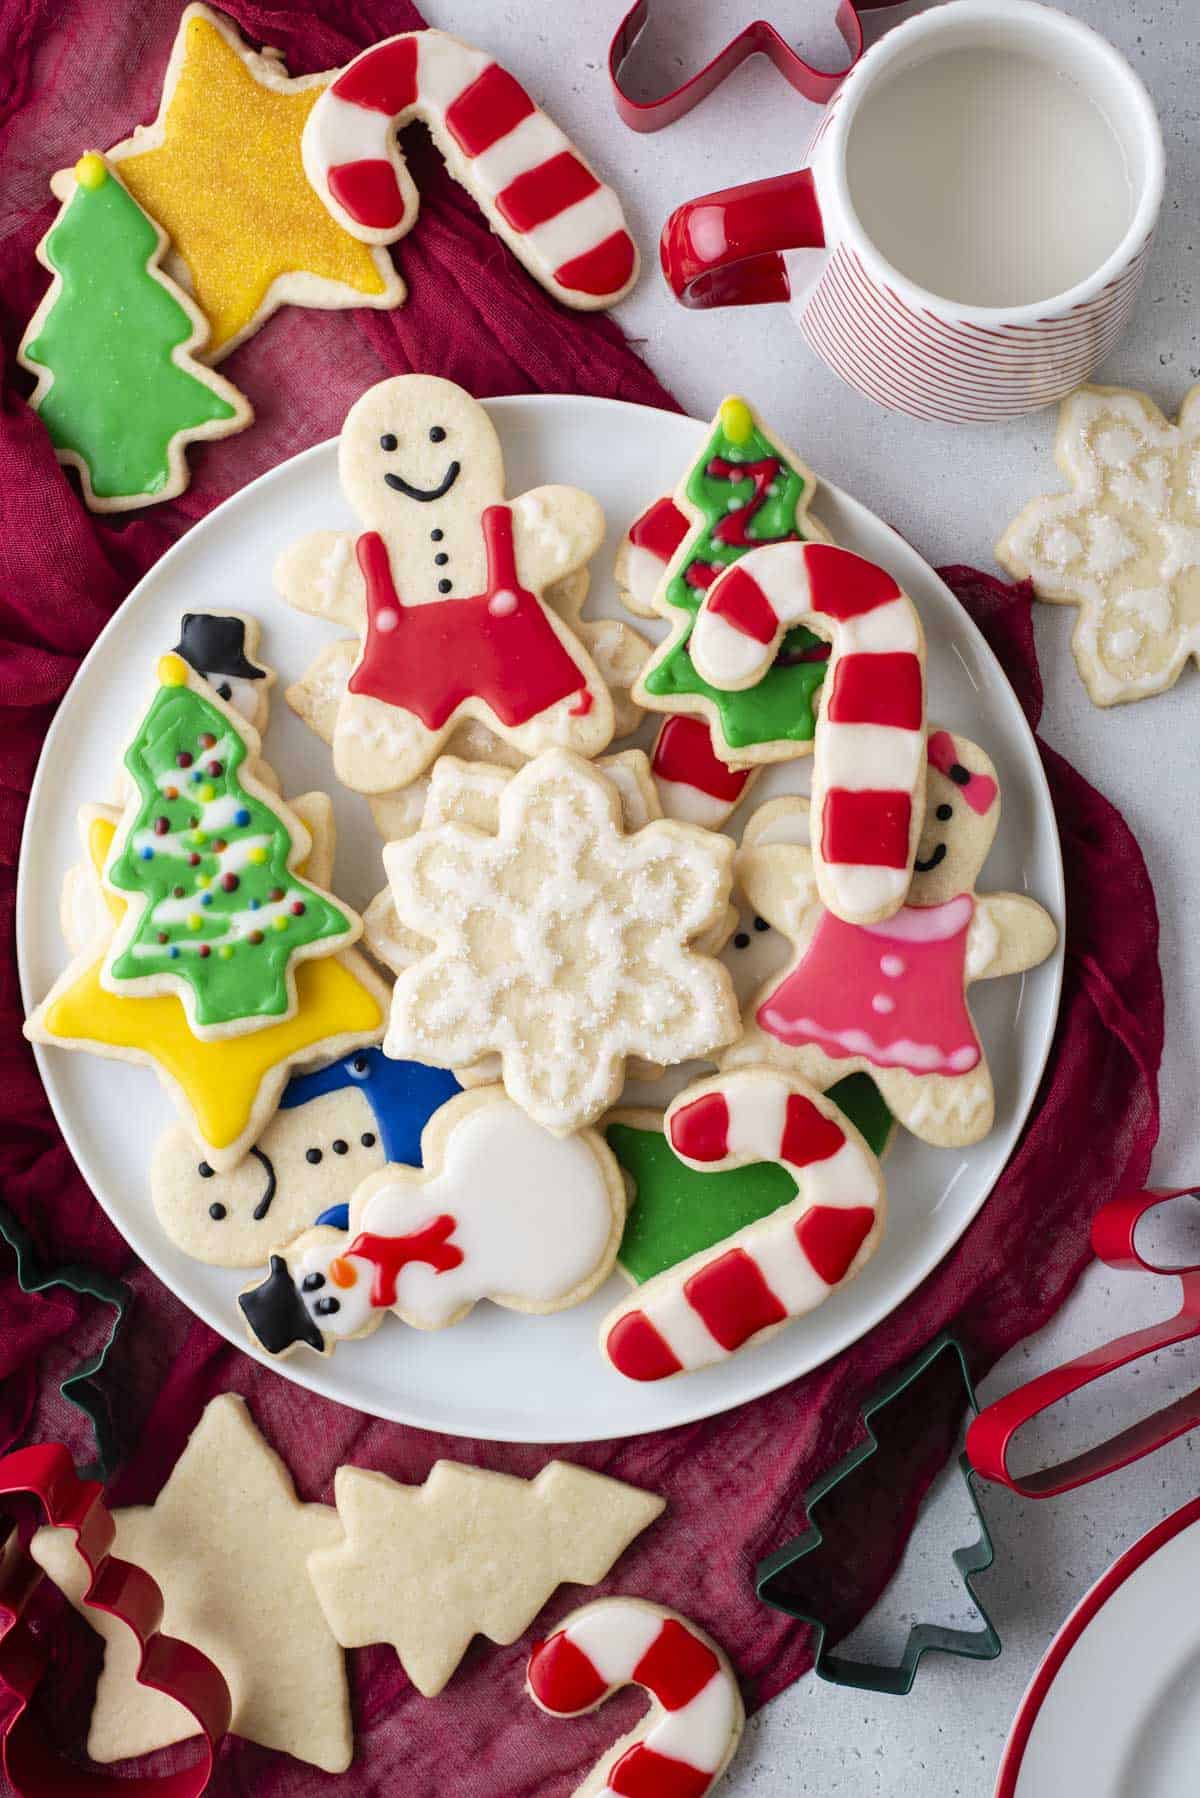 a plate full of christmas cookies decorate with royal icing on top of a red towel with more cookies, cookie cutters and a cup of milk around it